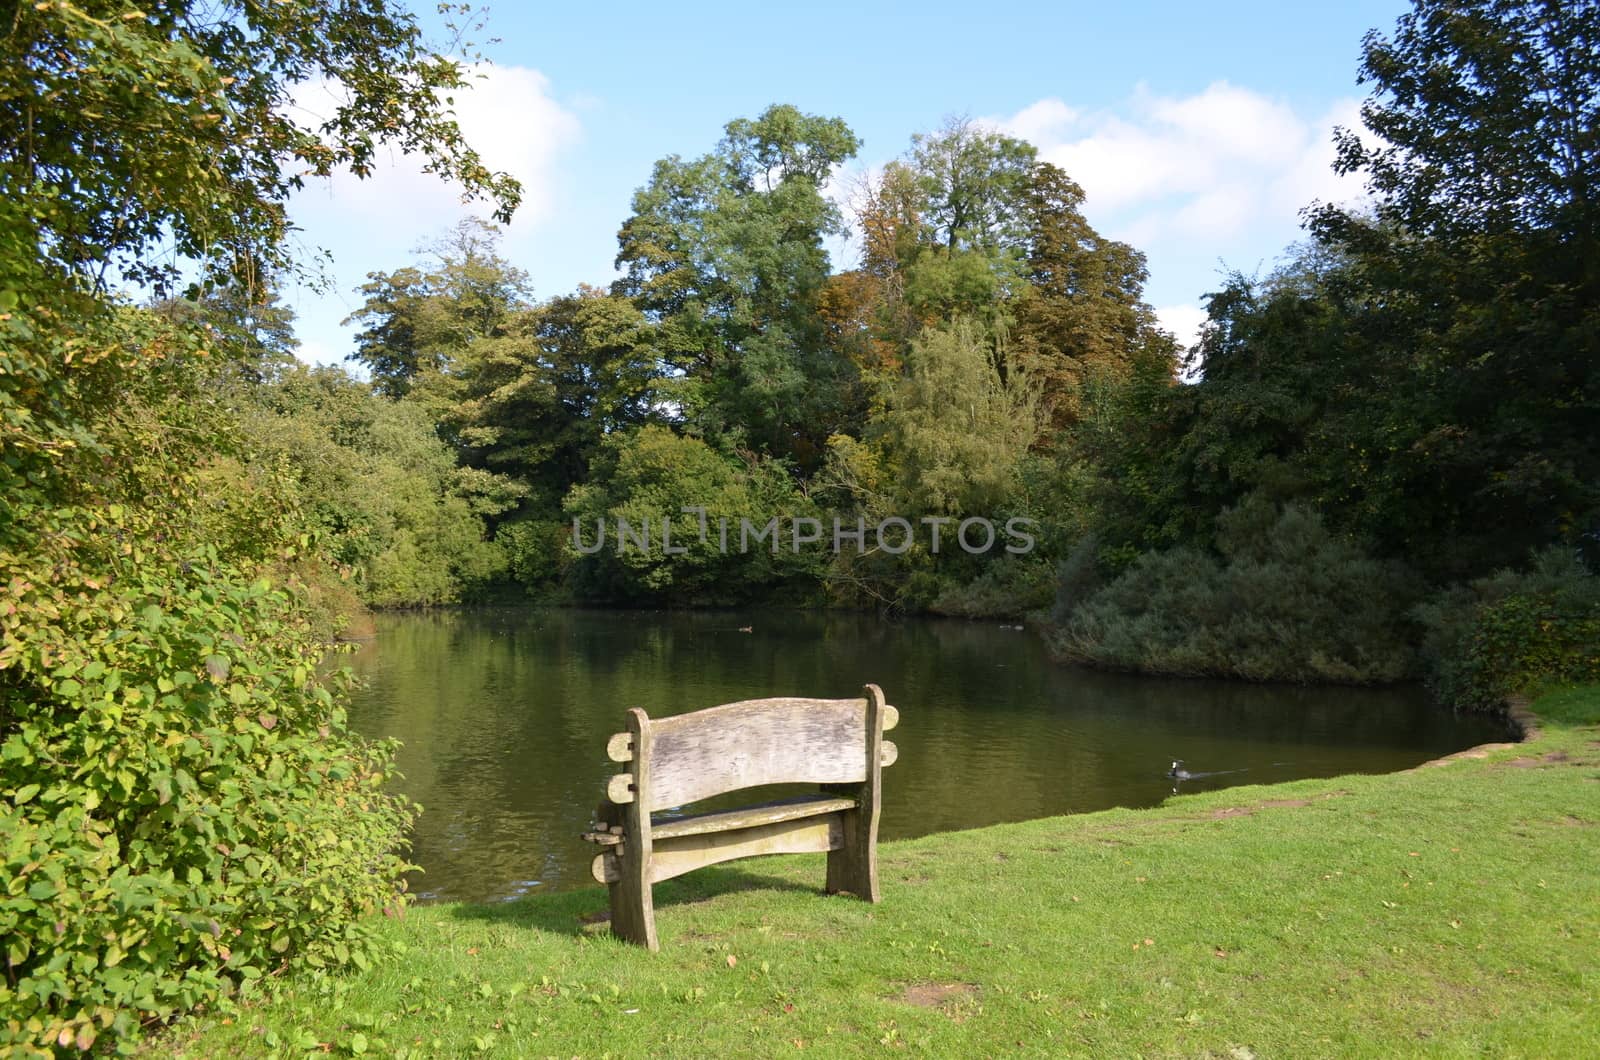 Rustic wood bench set next to a pretty countryside village pond in England.